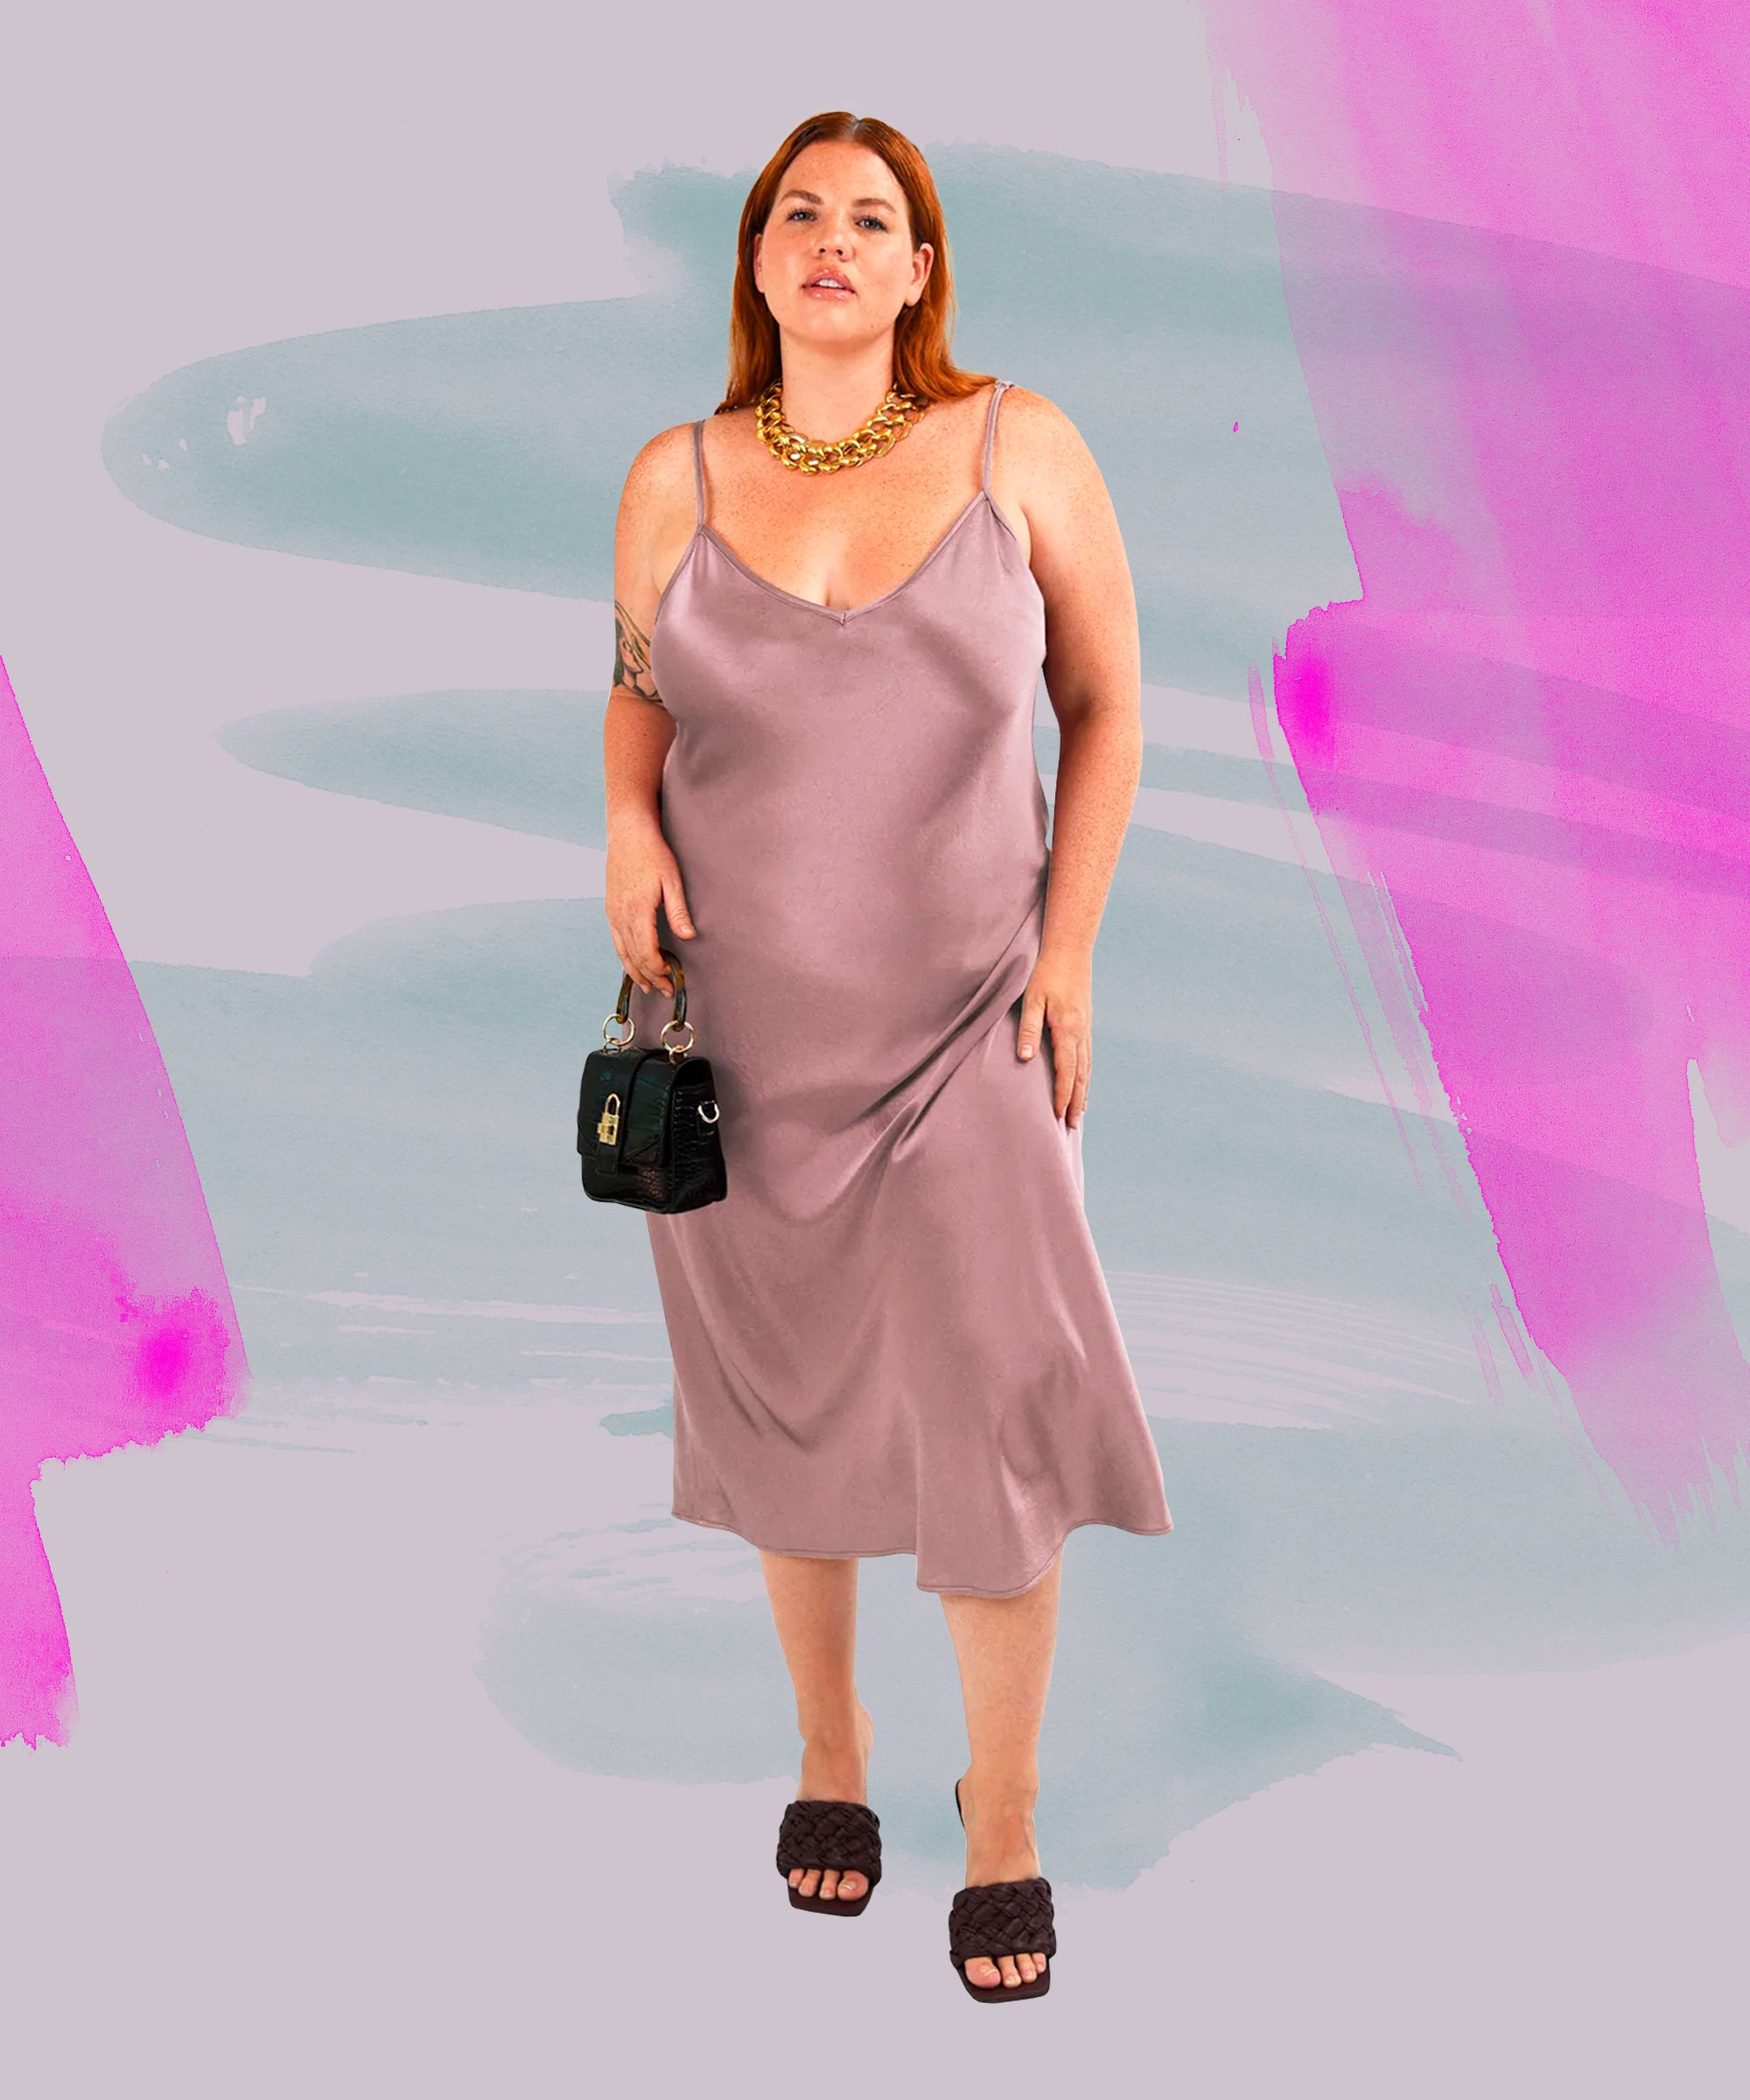 plus size dress for wedding guest